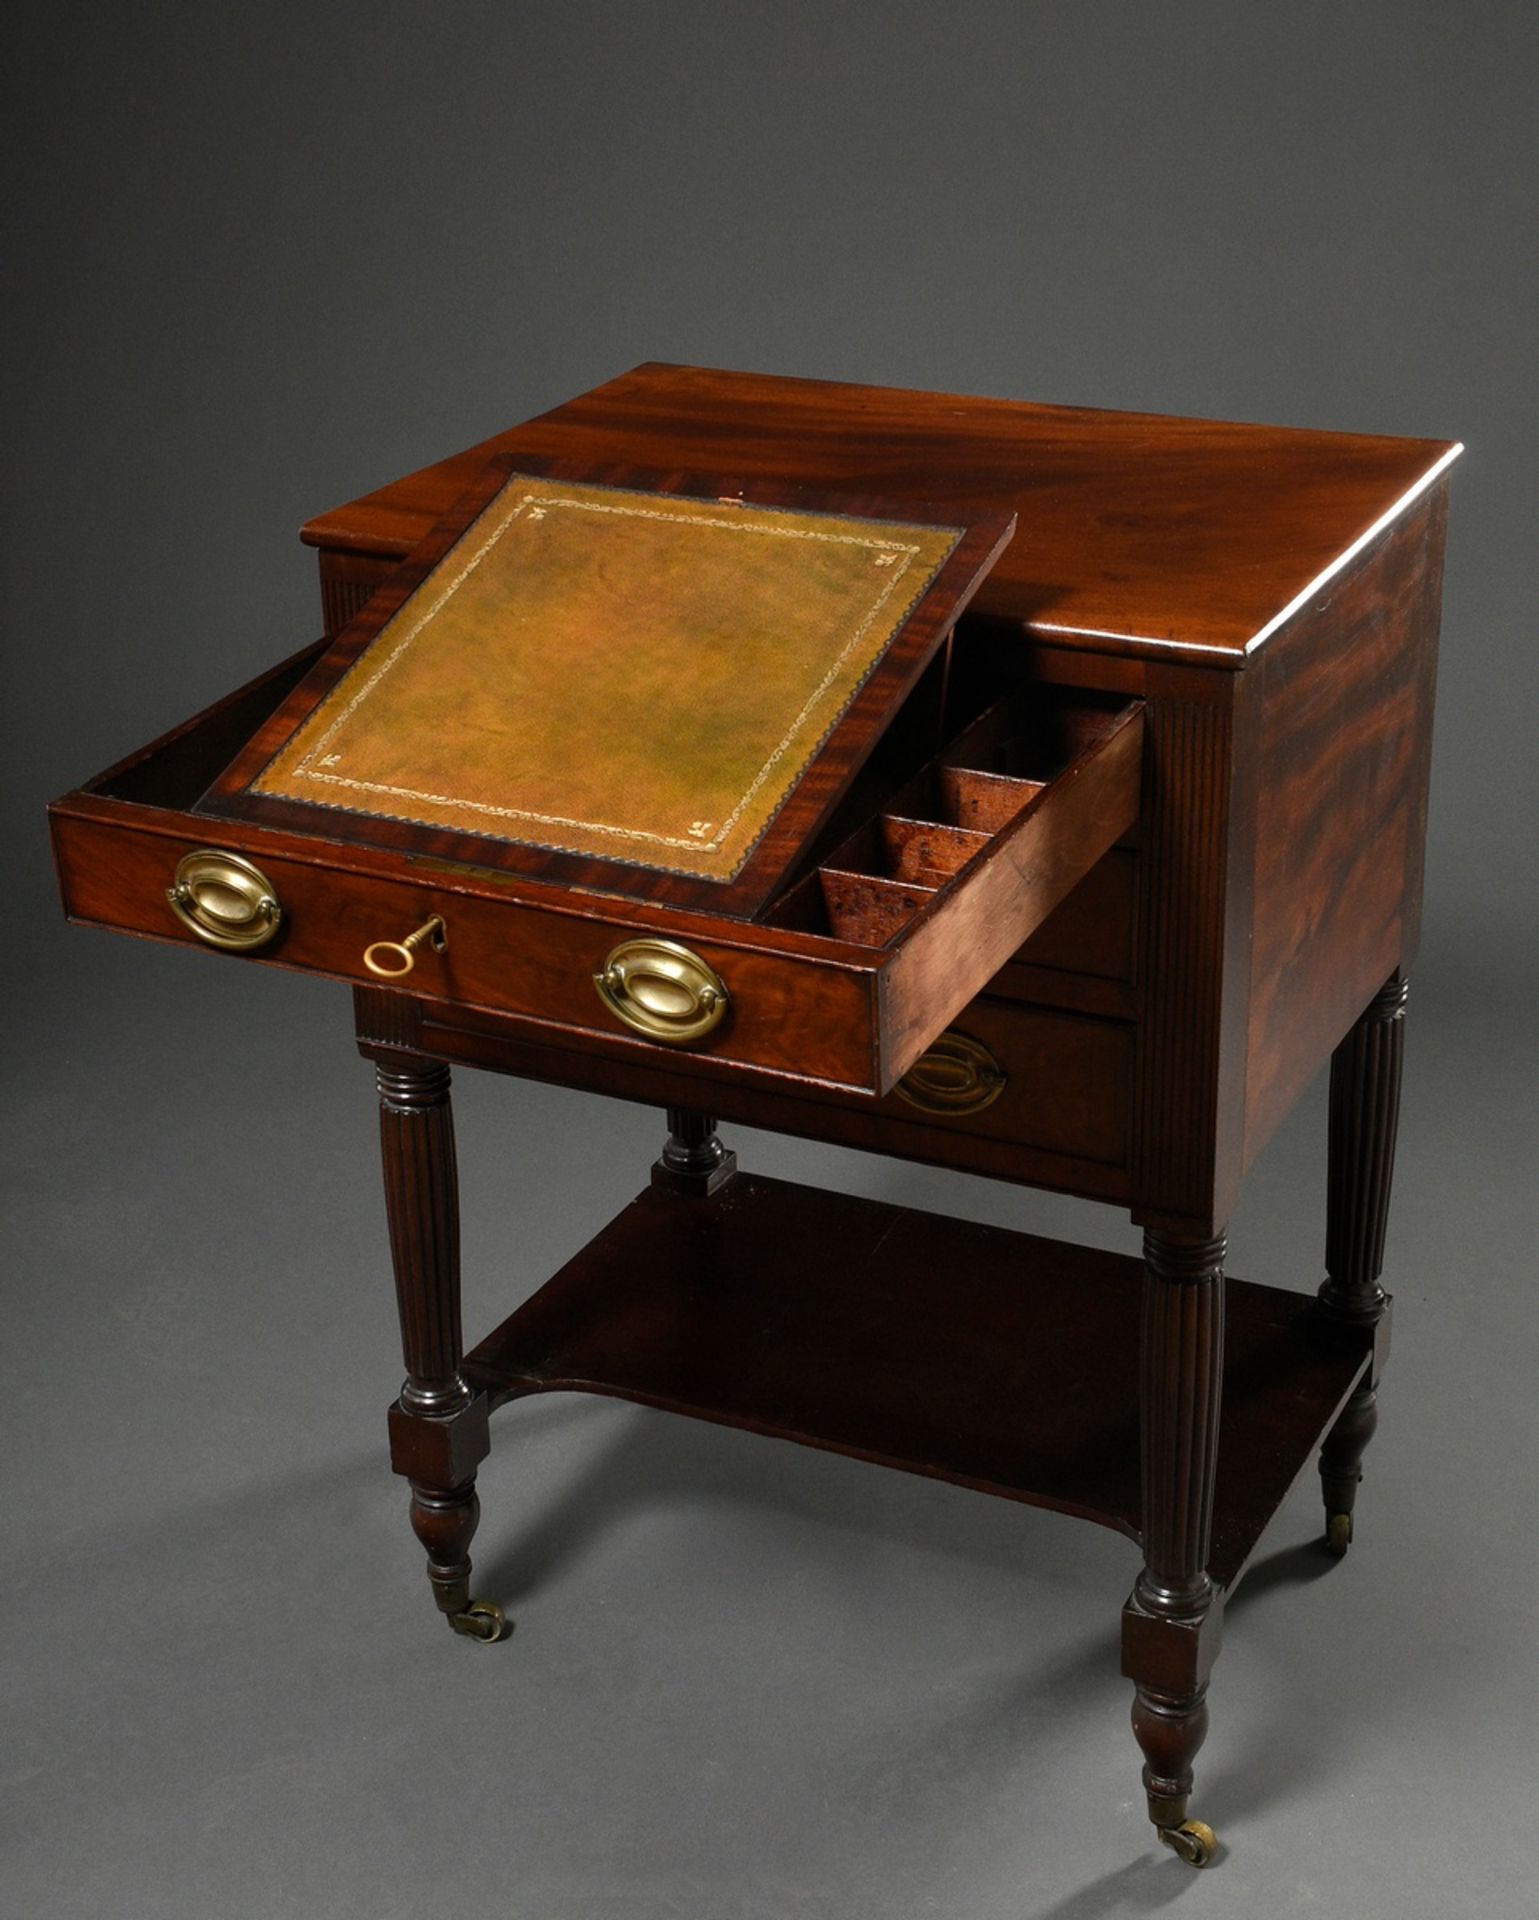 Three-bay occasional furniture on fluted legs with pull-out writing drawer and punched leather top, - Image 4 of 6